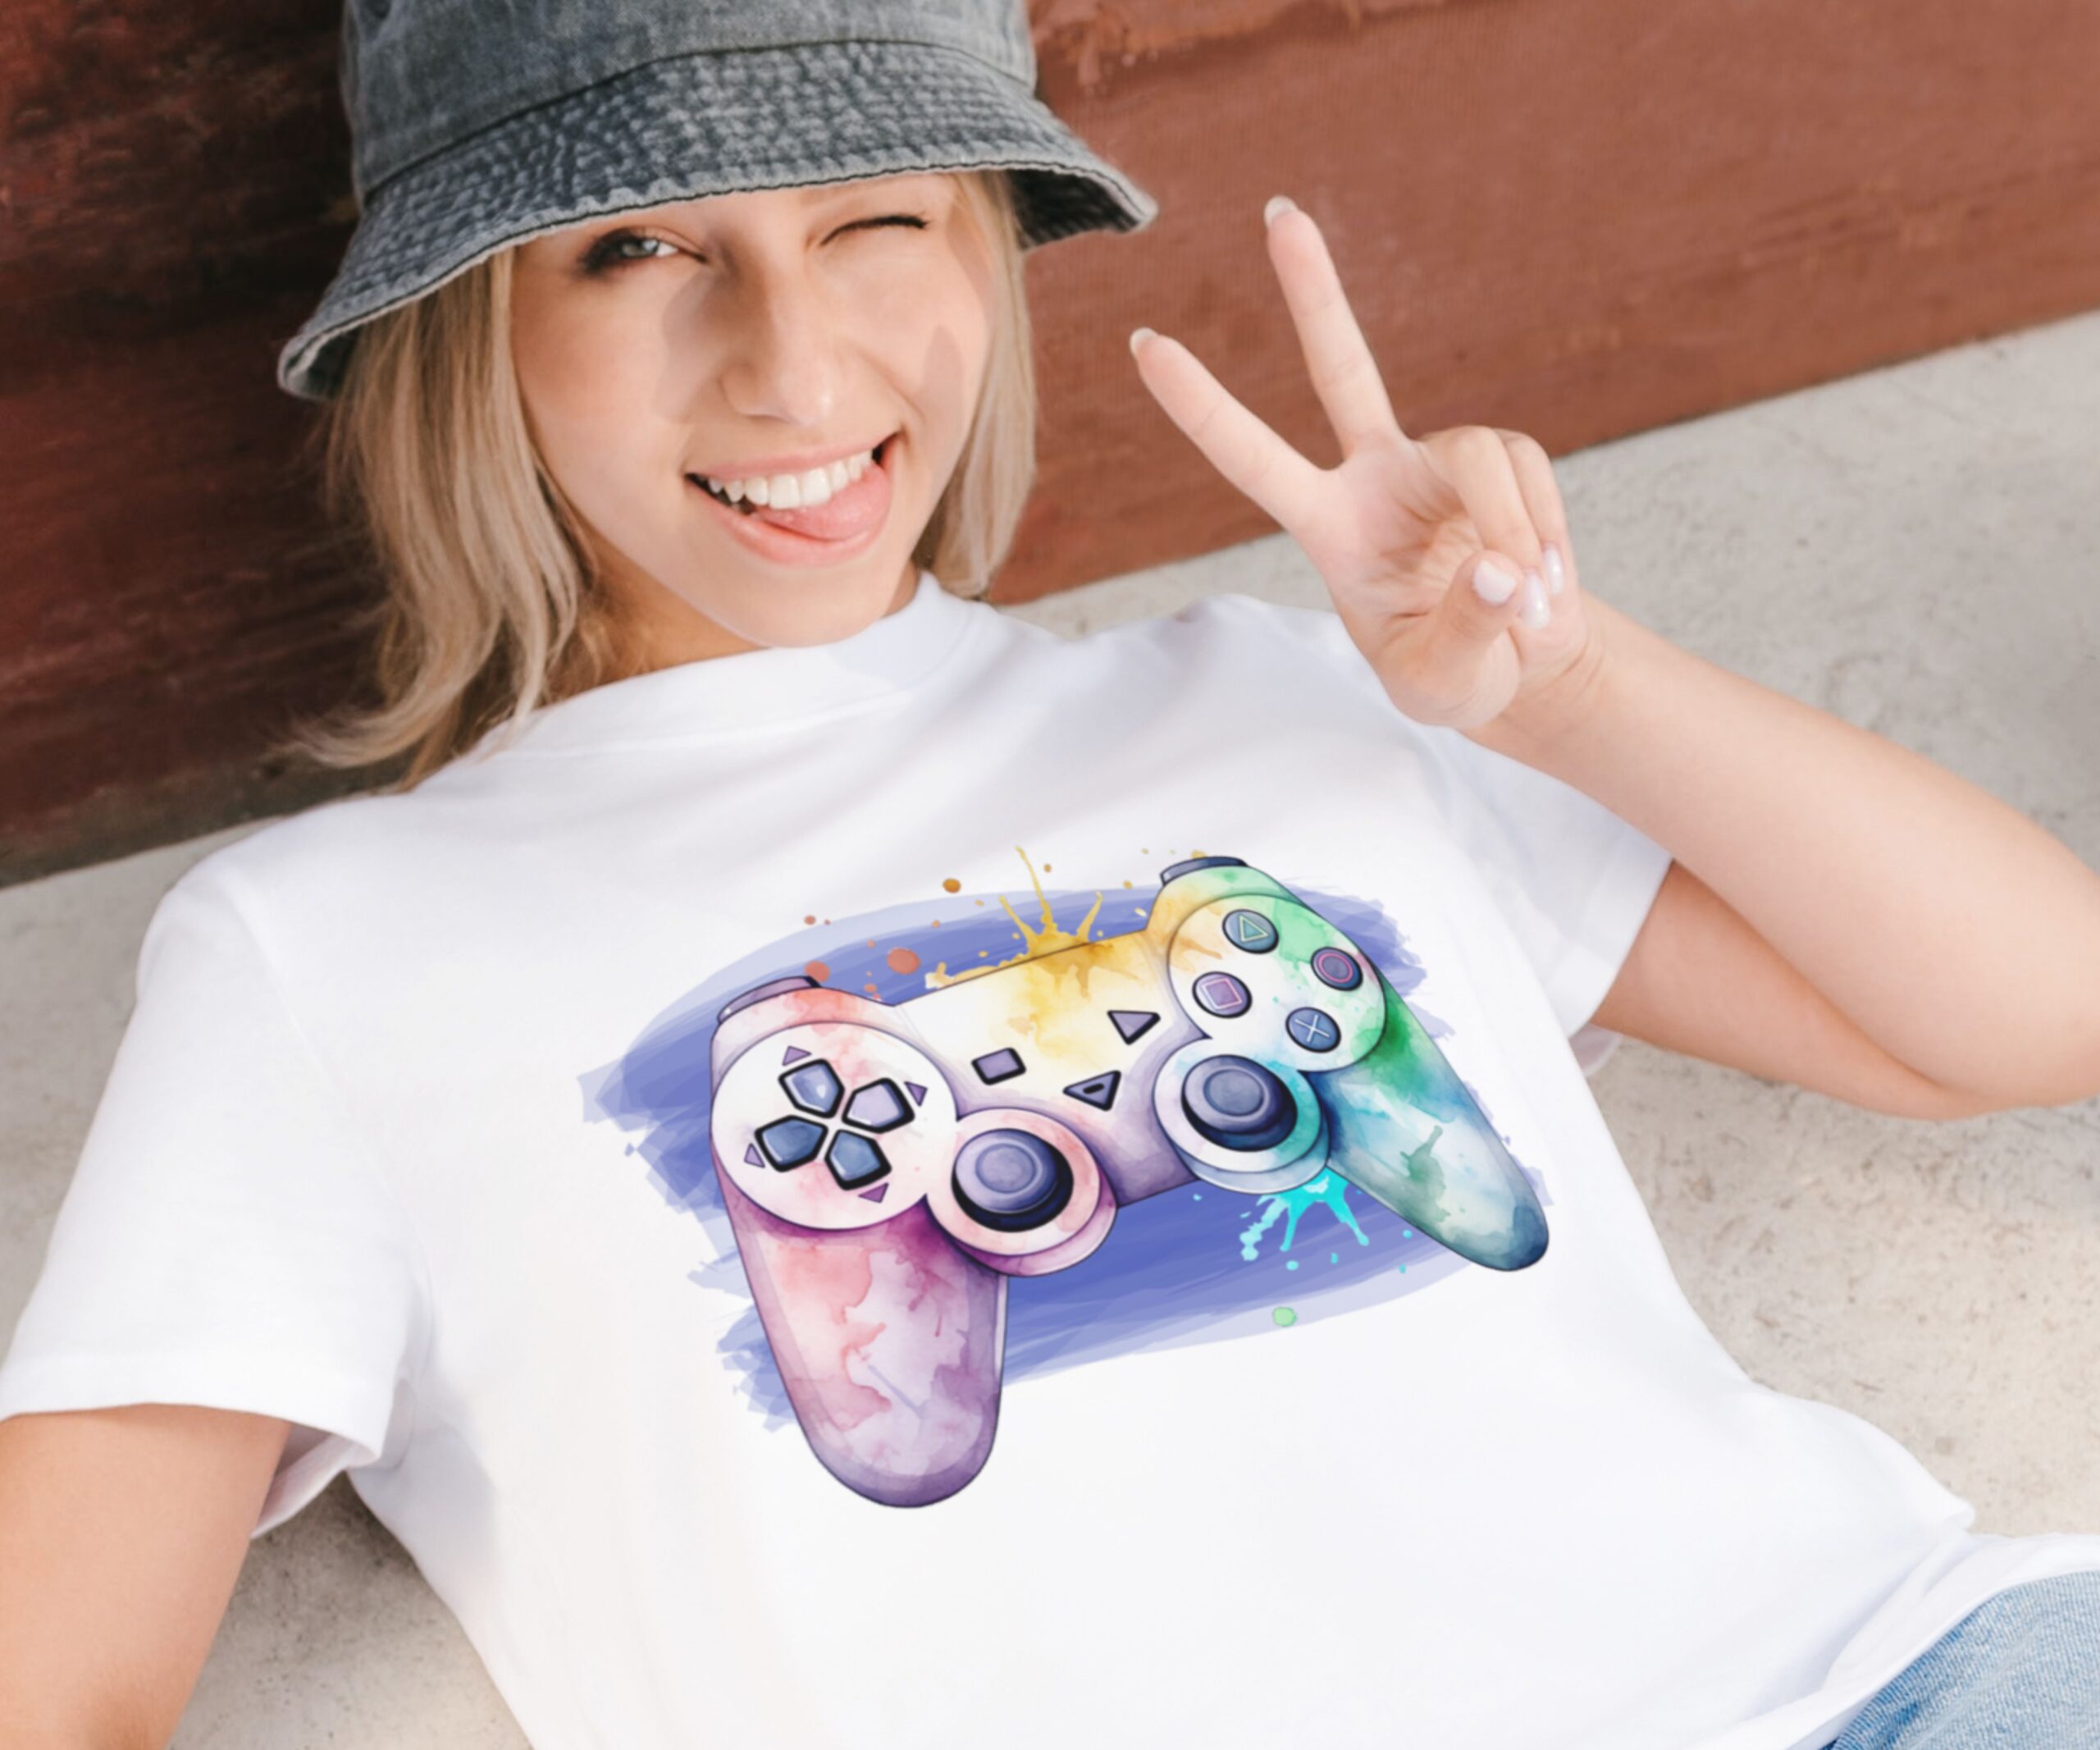 PNG for Sublimation - GAME PAD Art Design for Transfer, Shirt, Wall Art, Gamer Roon, Kids, etc. - 300dpi High-Resolution - Instant Download (Copy)